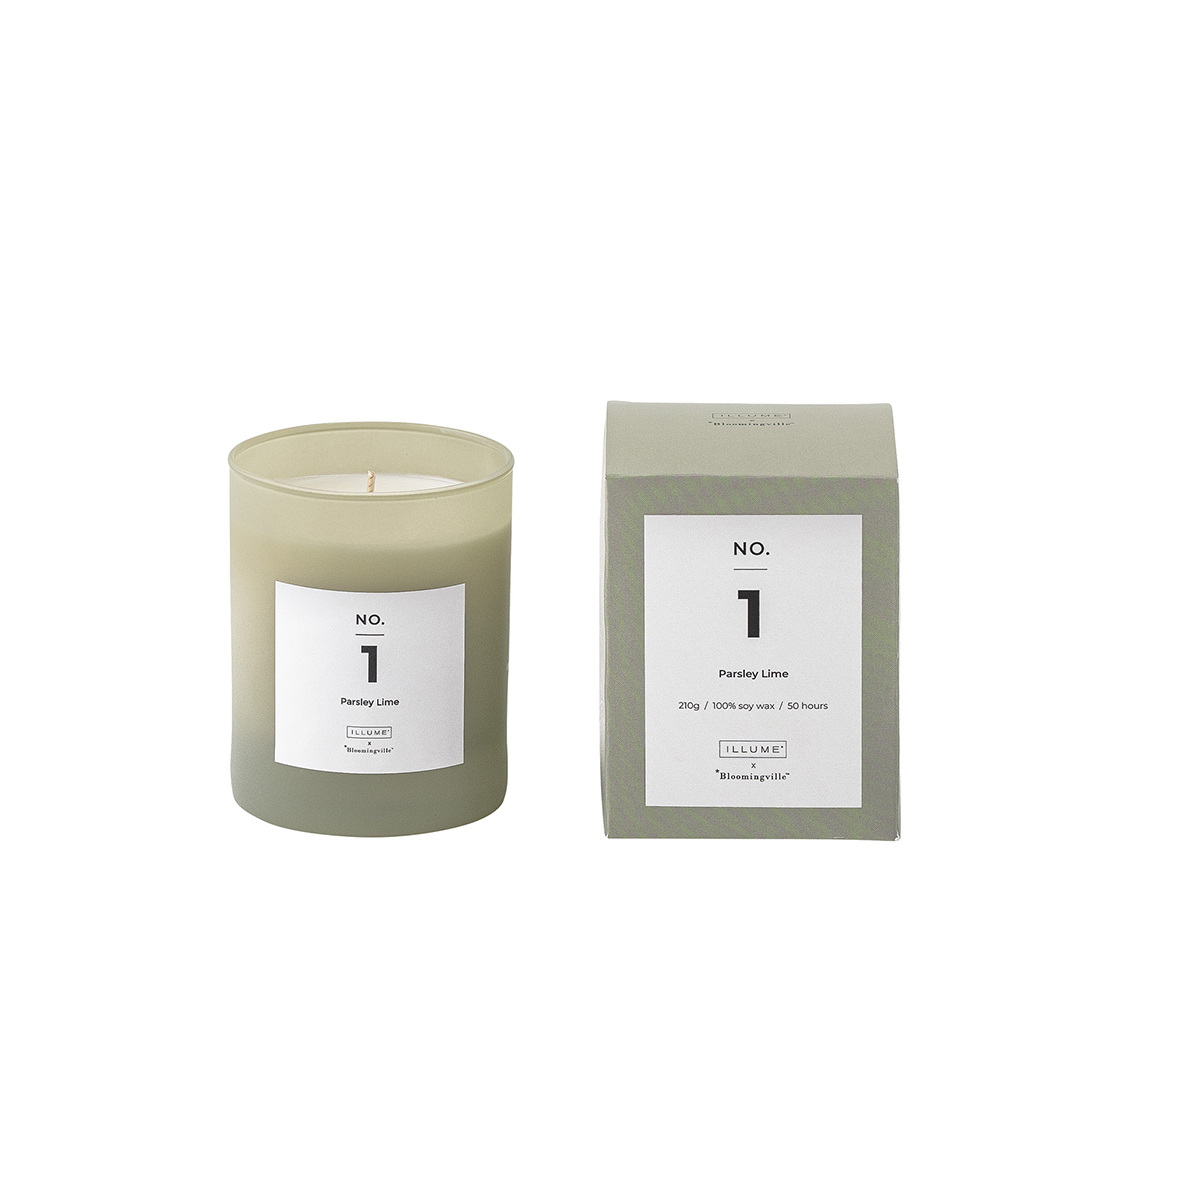 Bloomingville No. 1 - Parsley Lime Scented Candle, Soy Wax